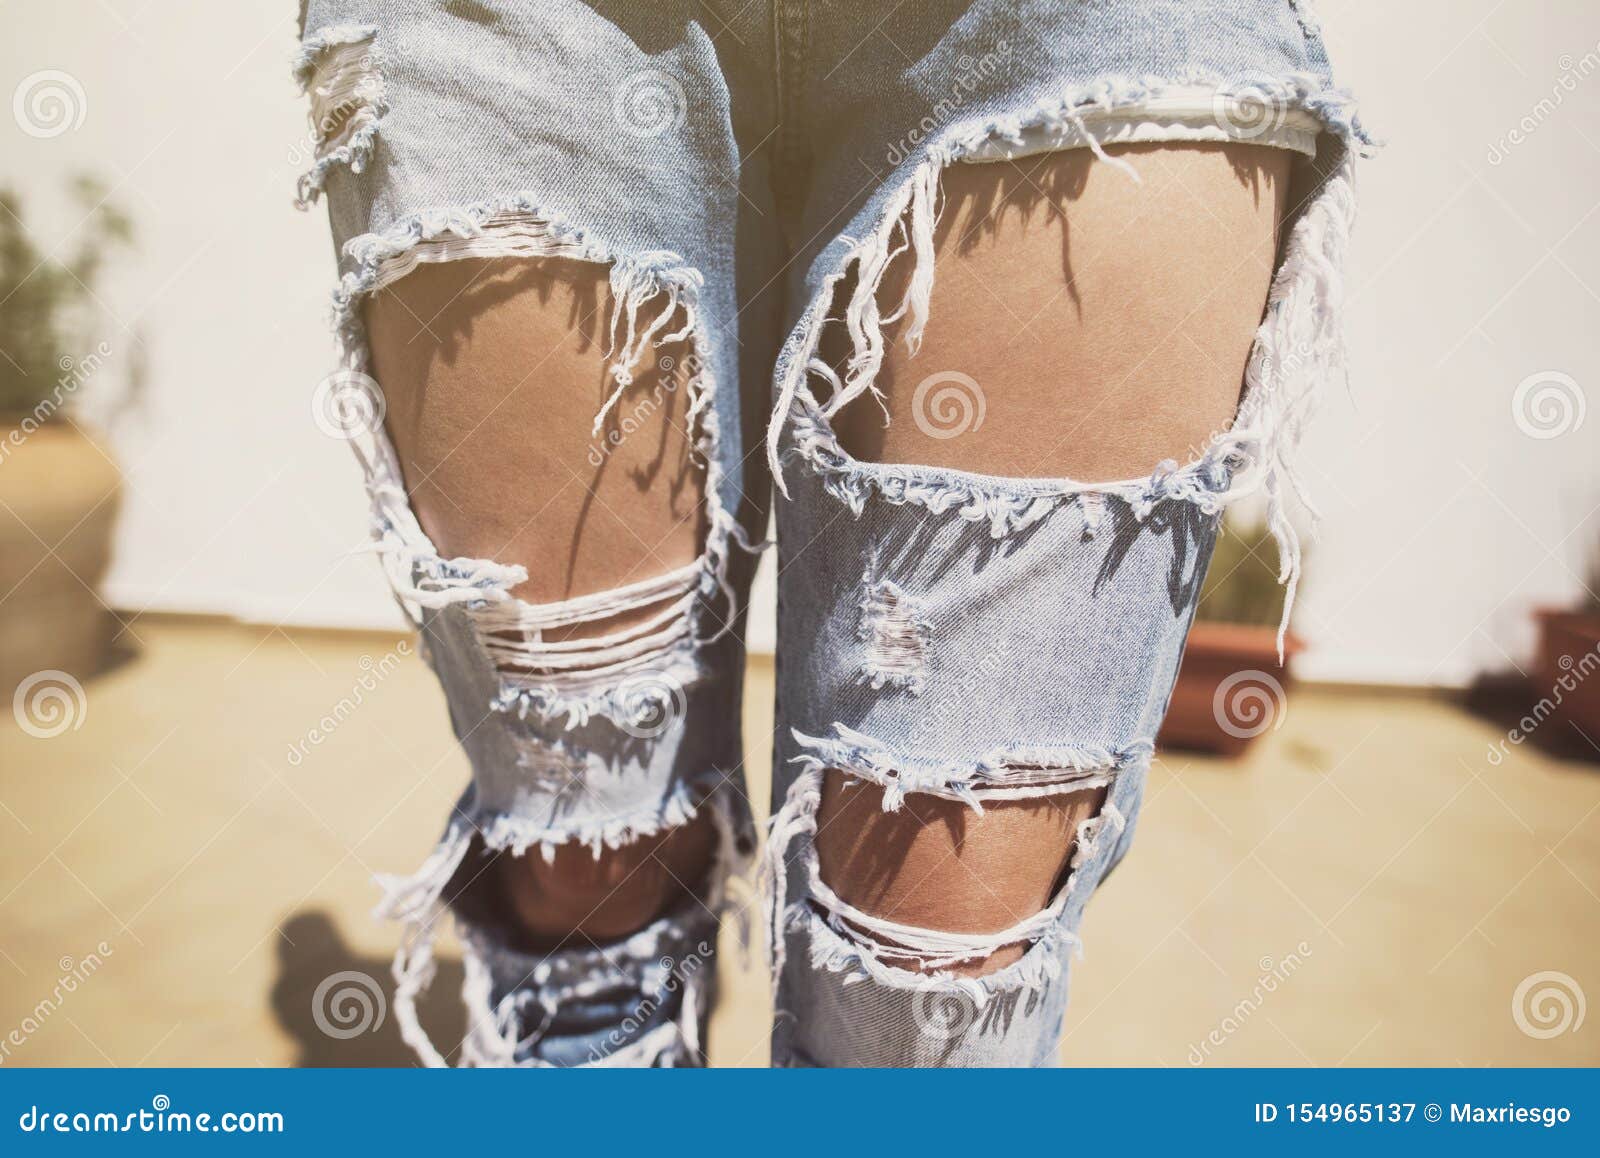 Anonymous Image of Woman with Torn Jeans on a Summer Day Stock Image ...